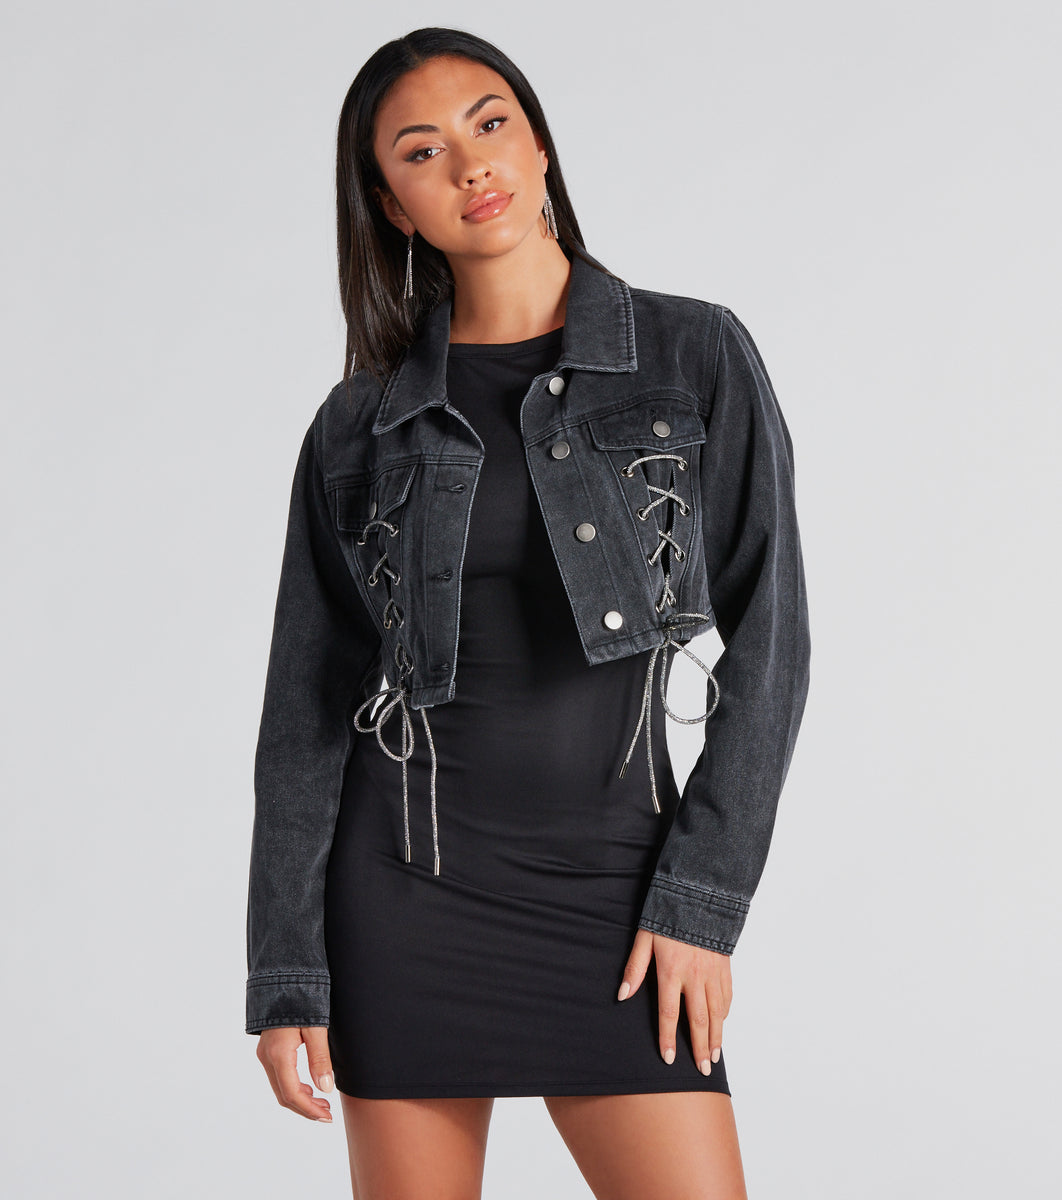 File:Jean Jacket with a Black Floral Romper, Black Tights, and Cutout  Boots.jpg - Wikipedia